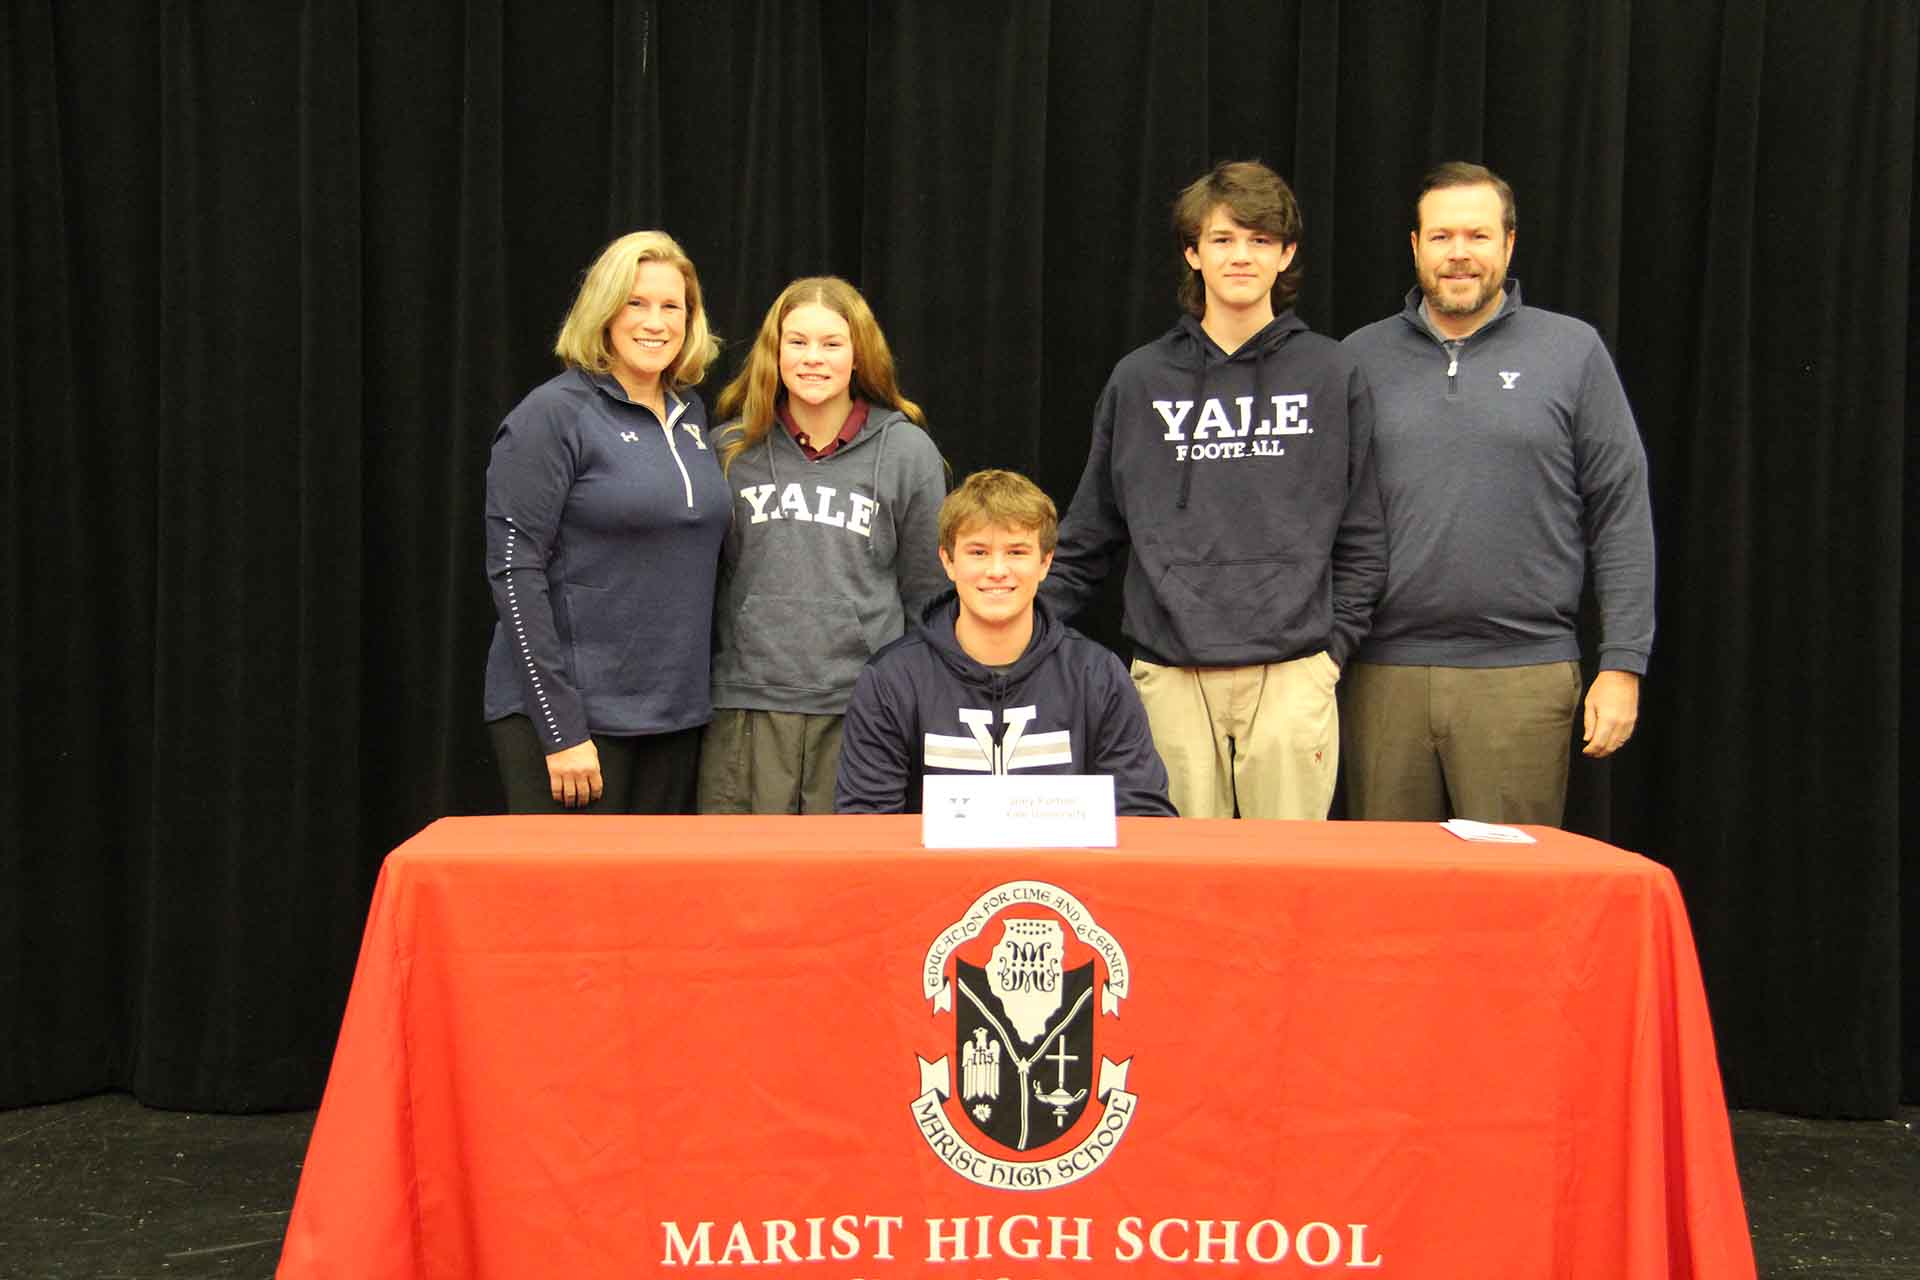 student-and-family-wheres-yale-college-merch-at-signing